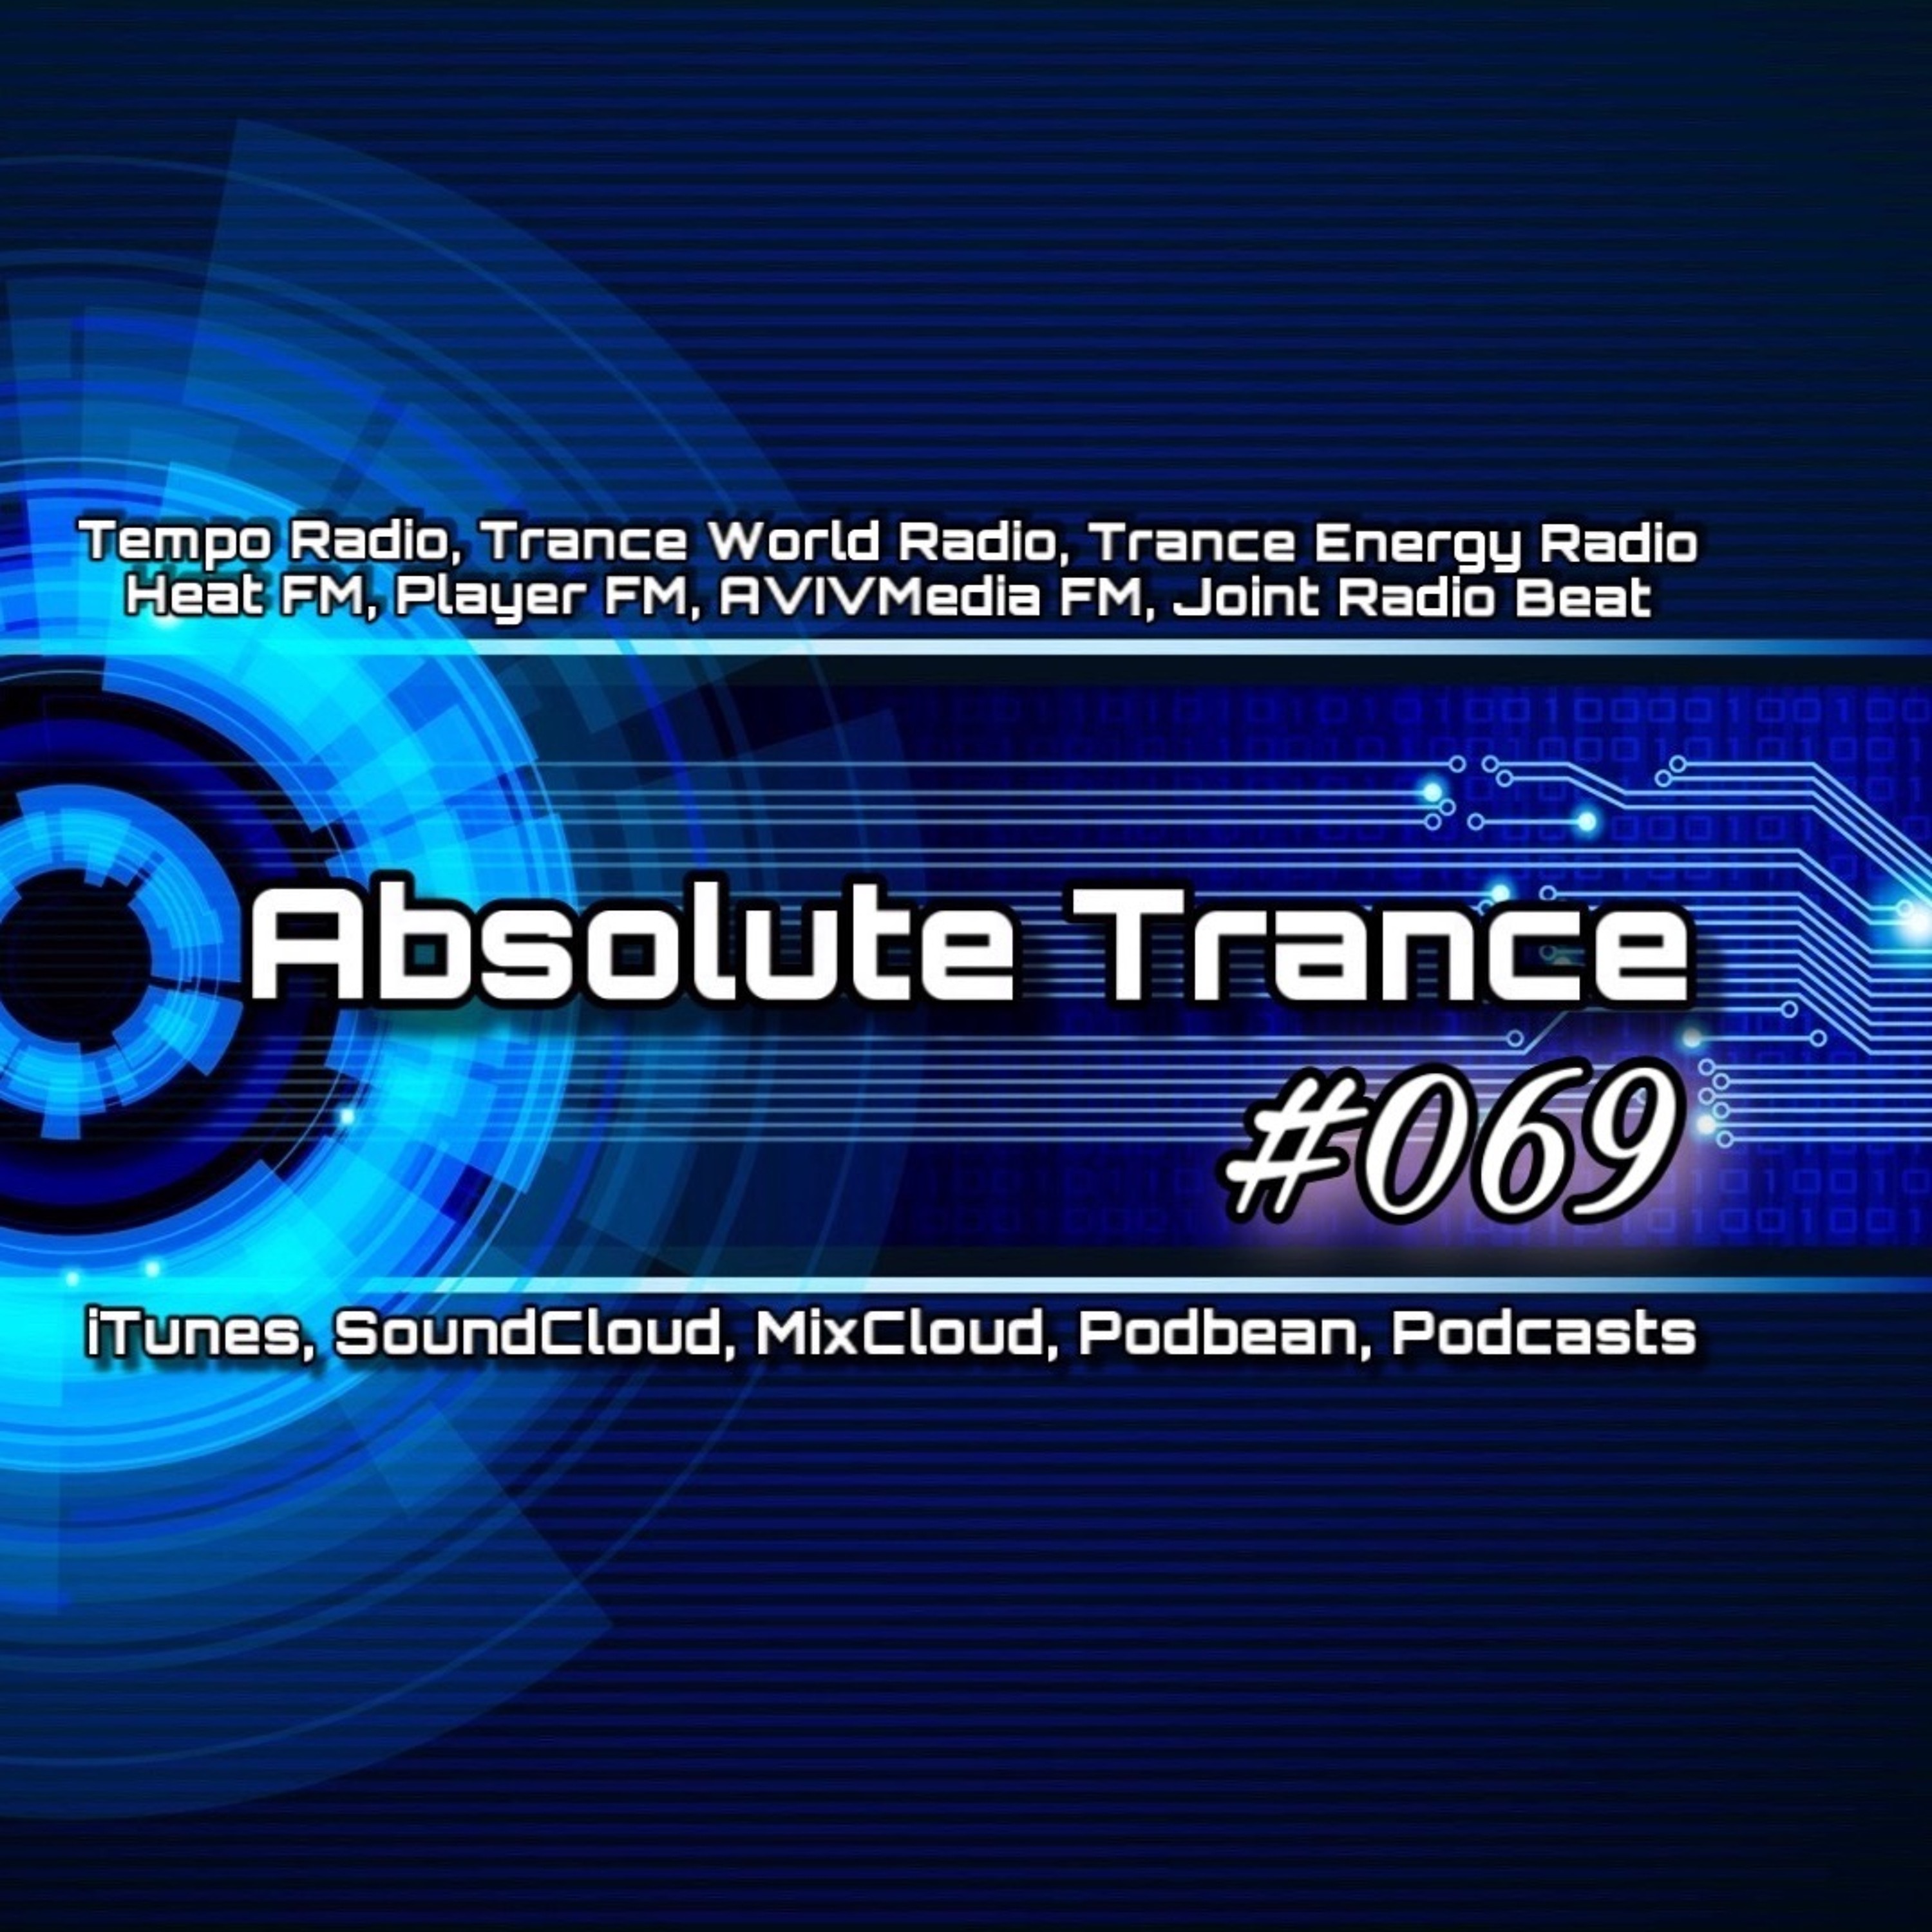 Absolute Trance #069